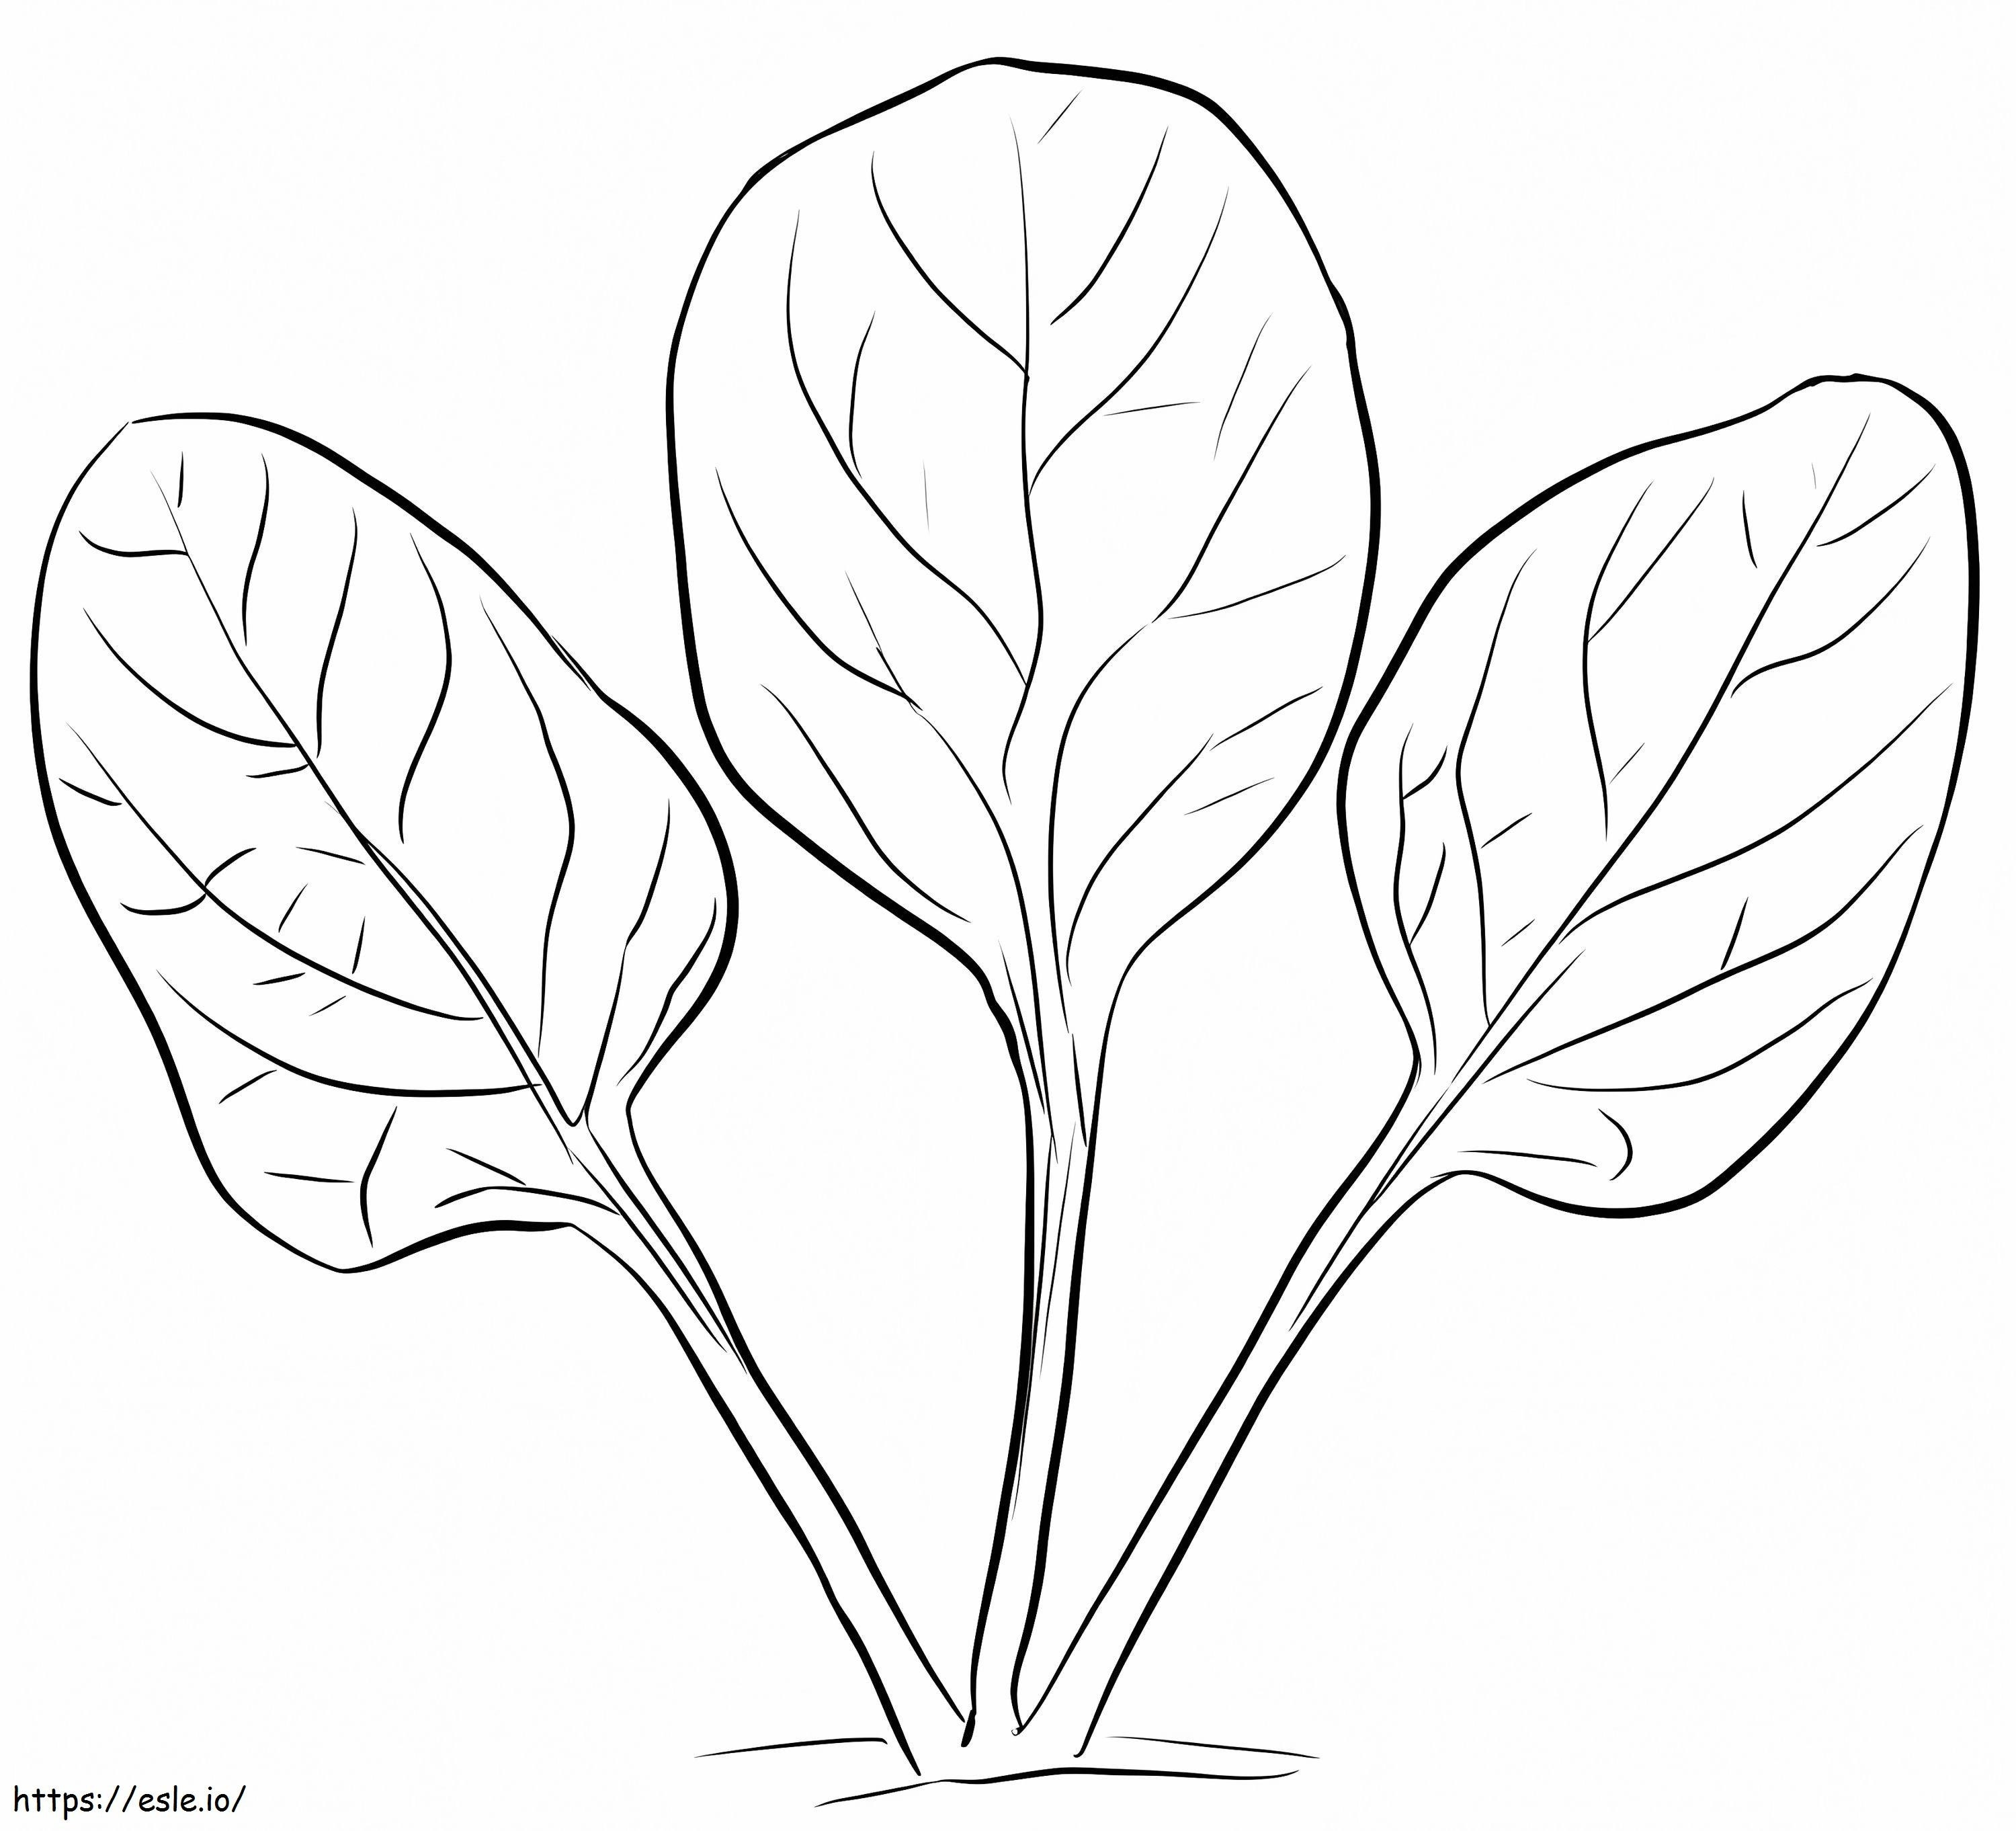 Spinach Leaves coloring page